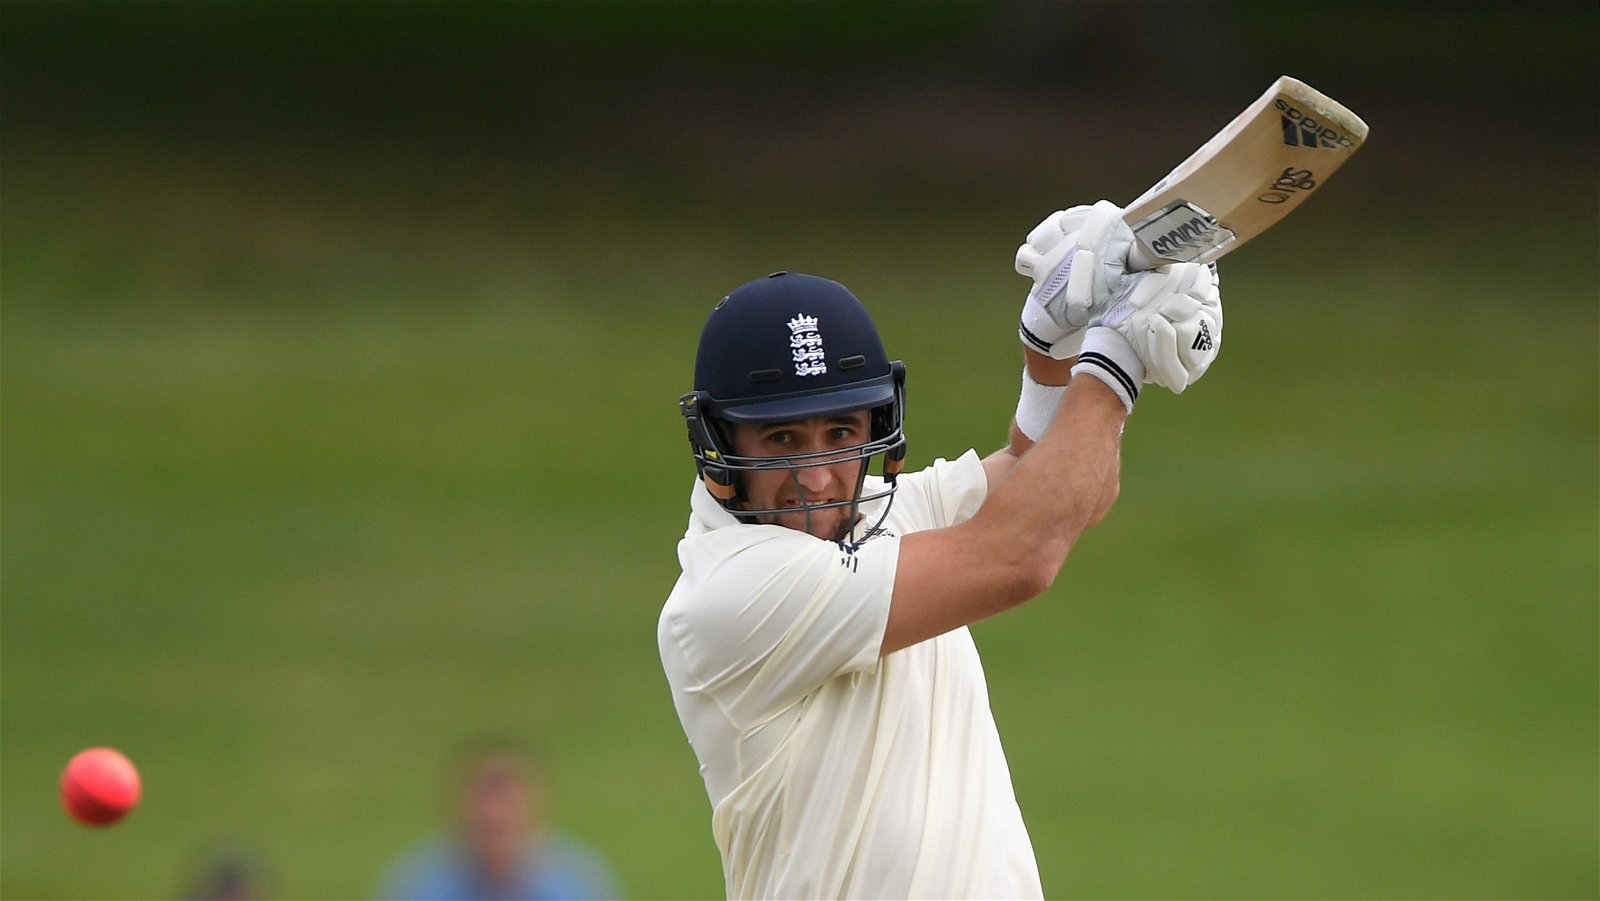 <em>The likes of Liam Livingstone might want to use the start of the County season well to improve their chances before the next Test </em>